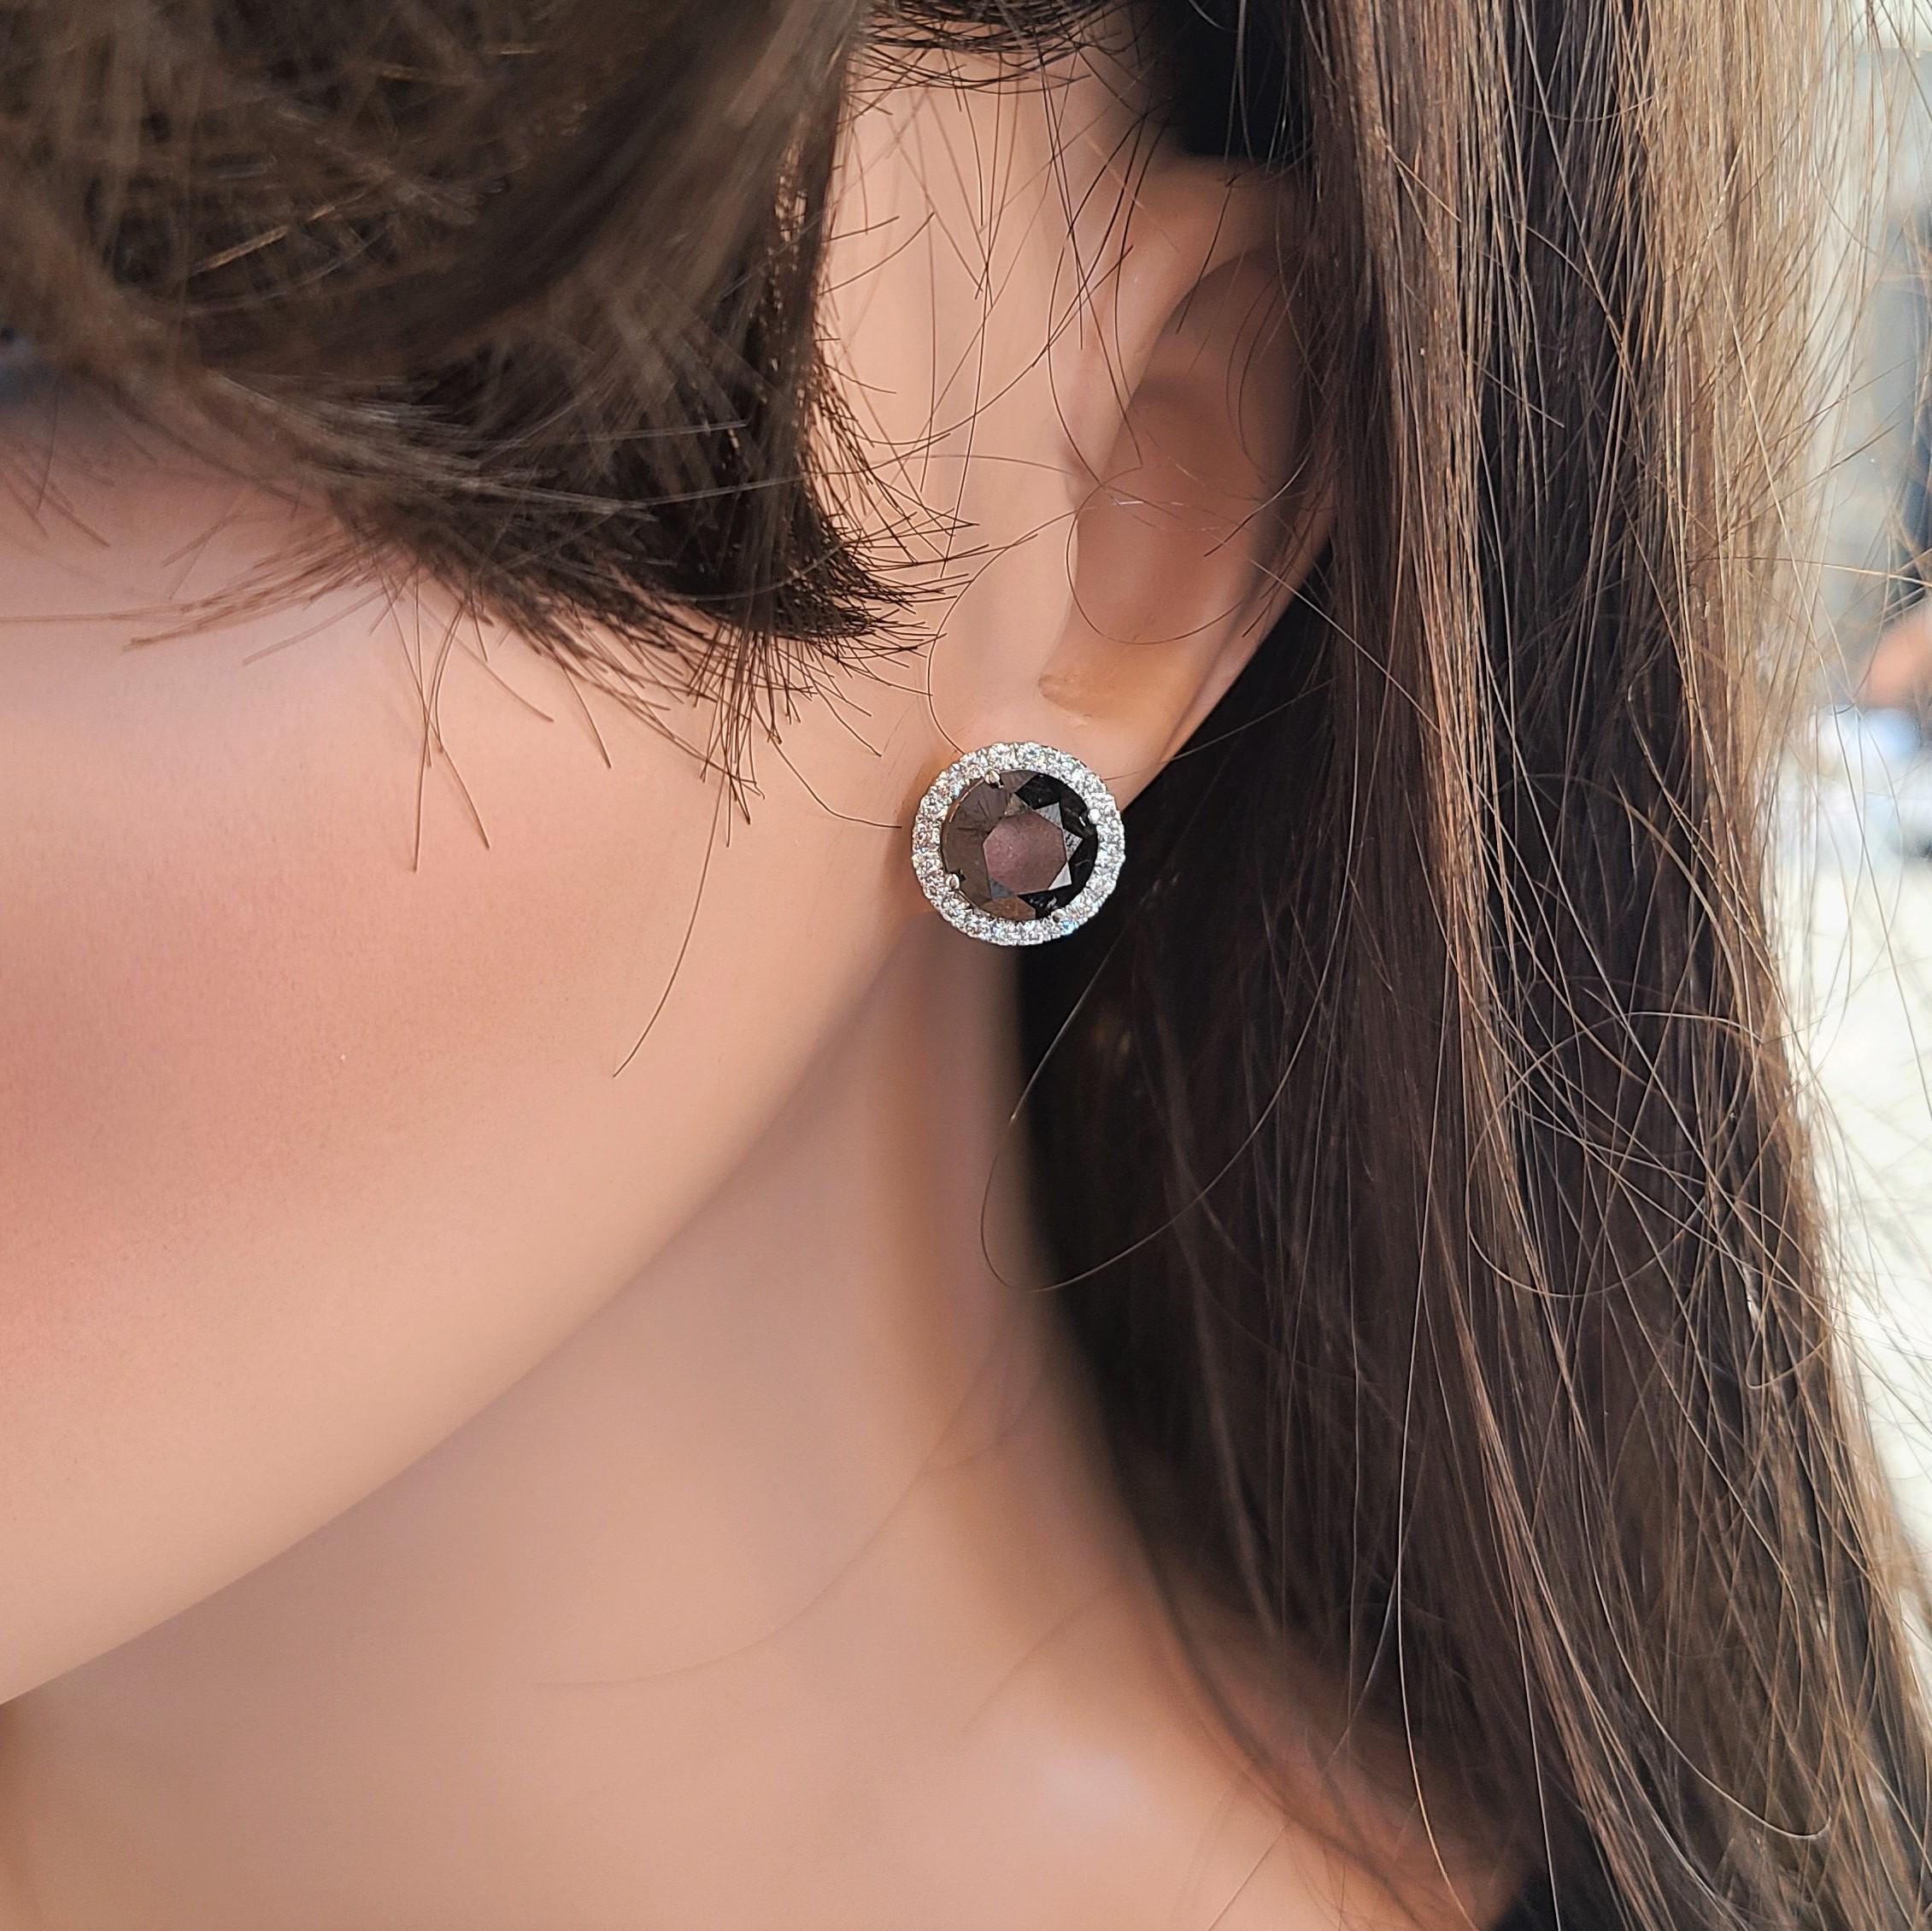 This pair of 7.39 carat total Black diamond stud earring and jackets are elegantly crafted in brightly polished 14 karat white gold and feature a total of 36 sparkling round brilliant cut diamonds. A total of 0.65 carat of diamonds adorn these